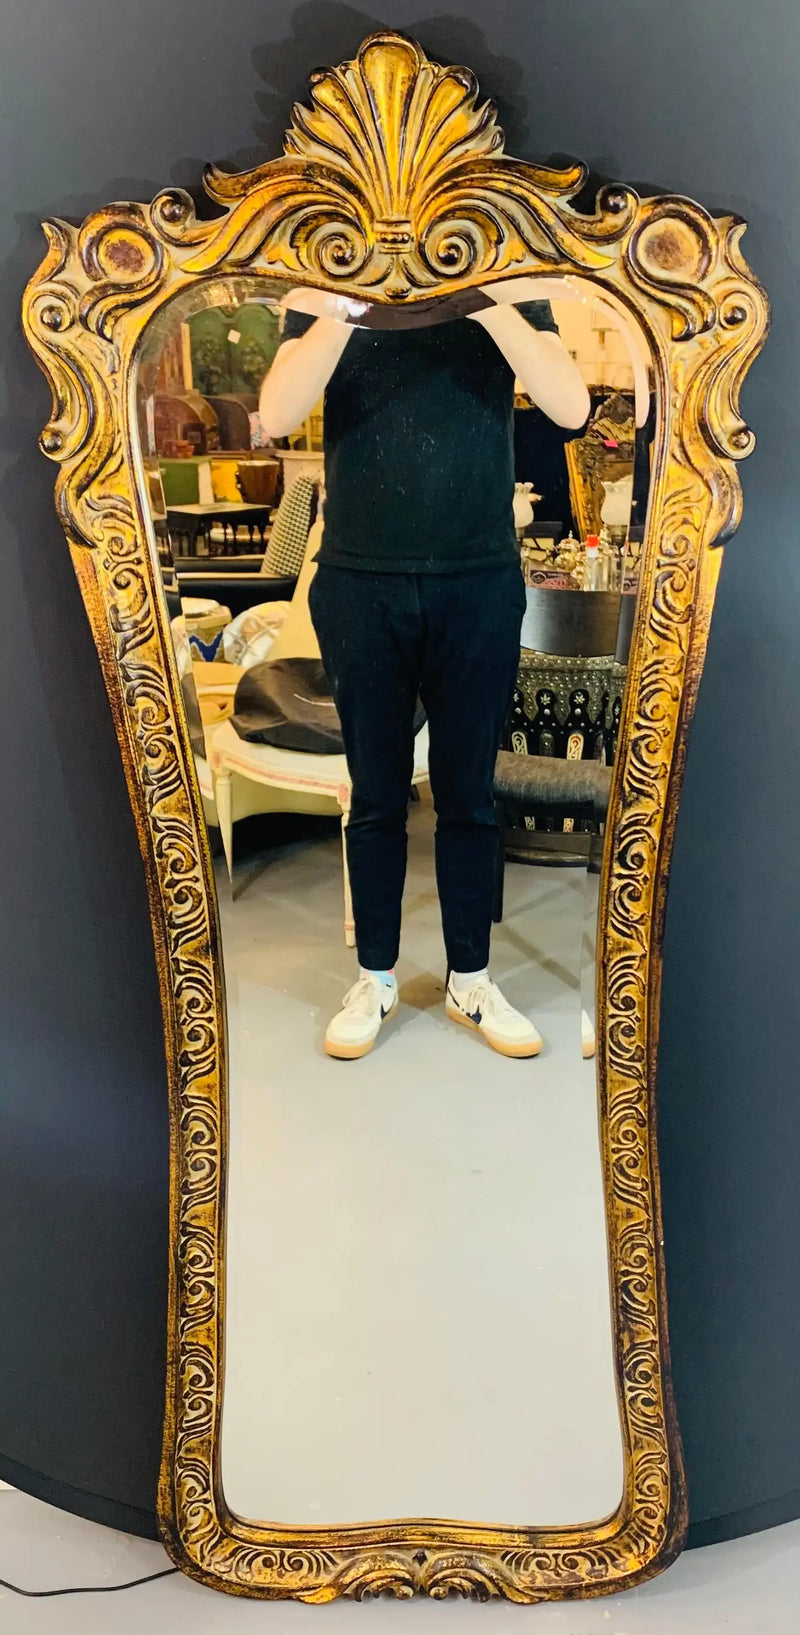 Regency Style Gilded Tall Wall or Dressing Mirror